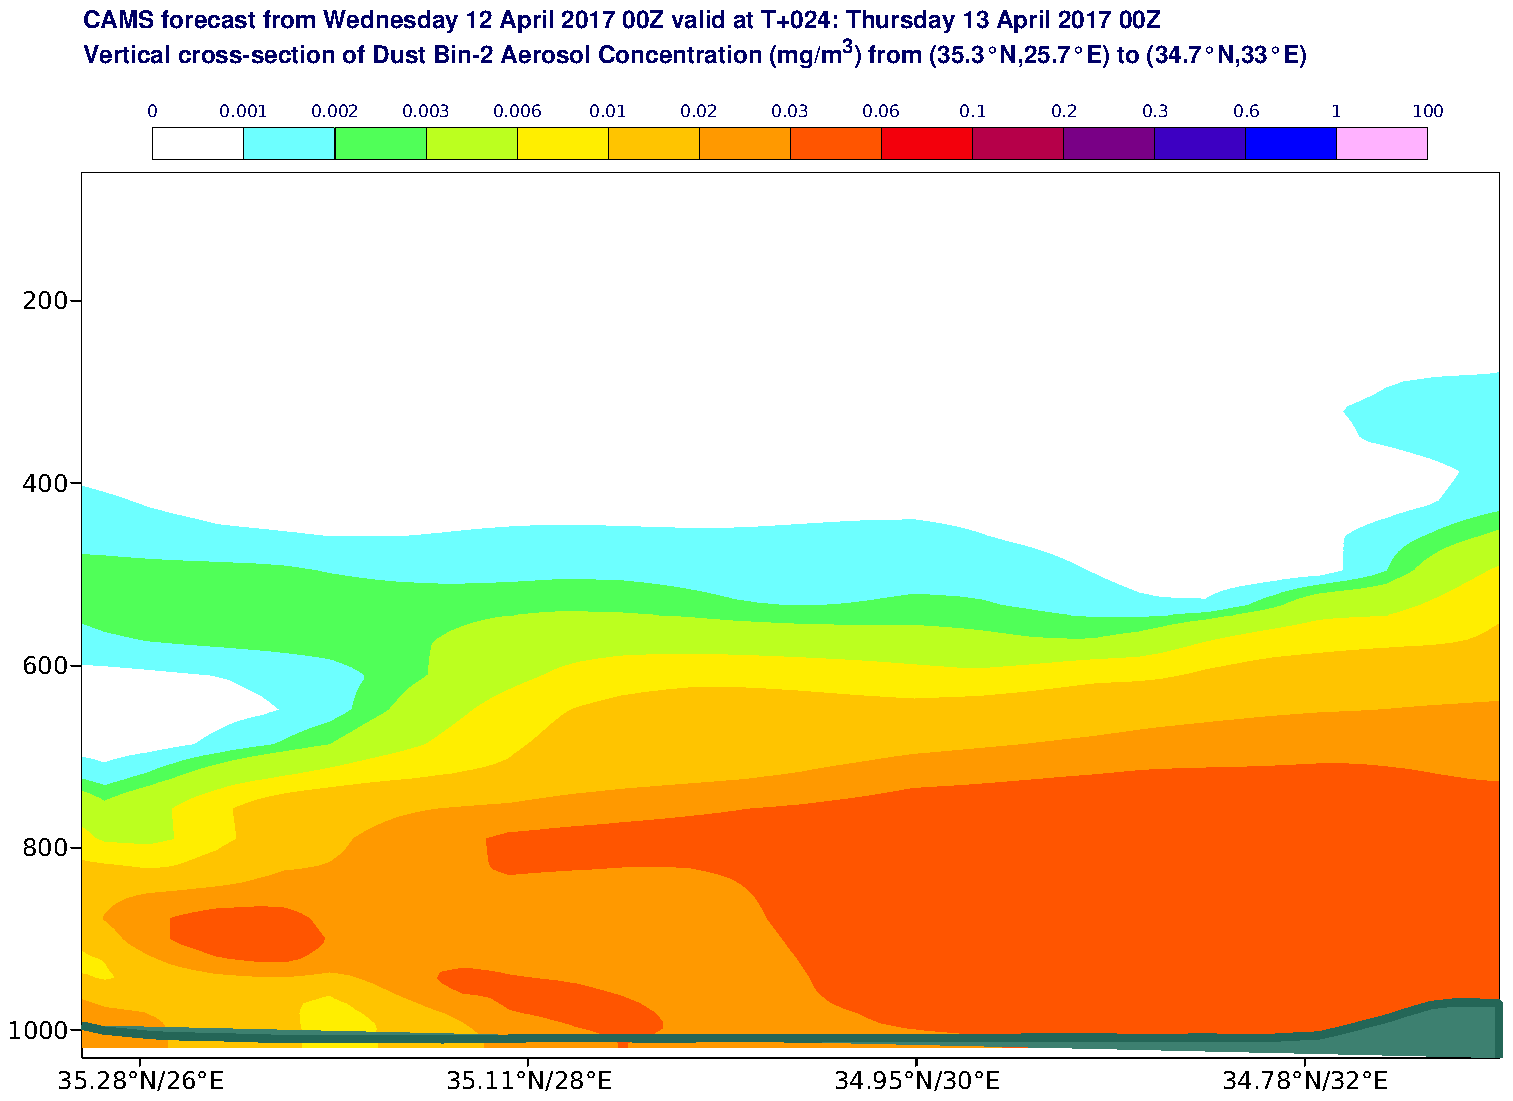 Vertical cross-section of Dust Bin-2 Aerosol Concentration (mg/m3) valid at T24 - 2017-04-13 00:00